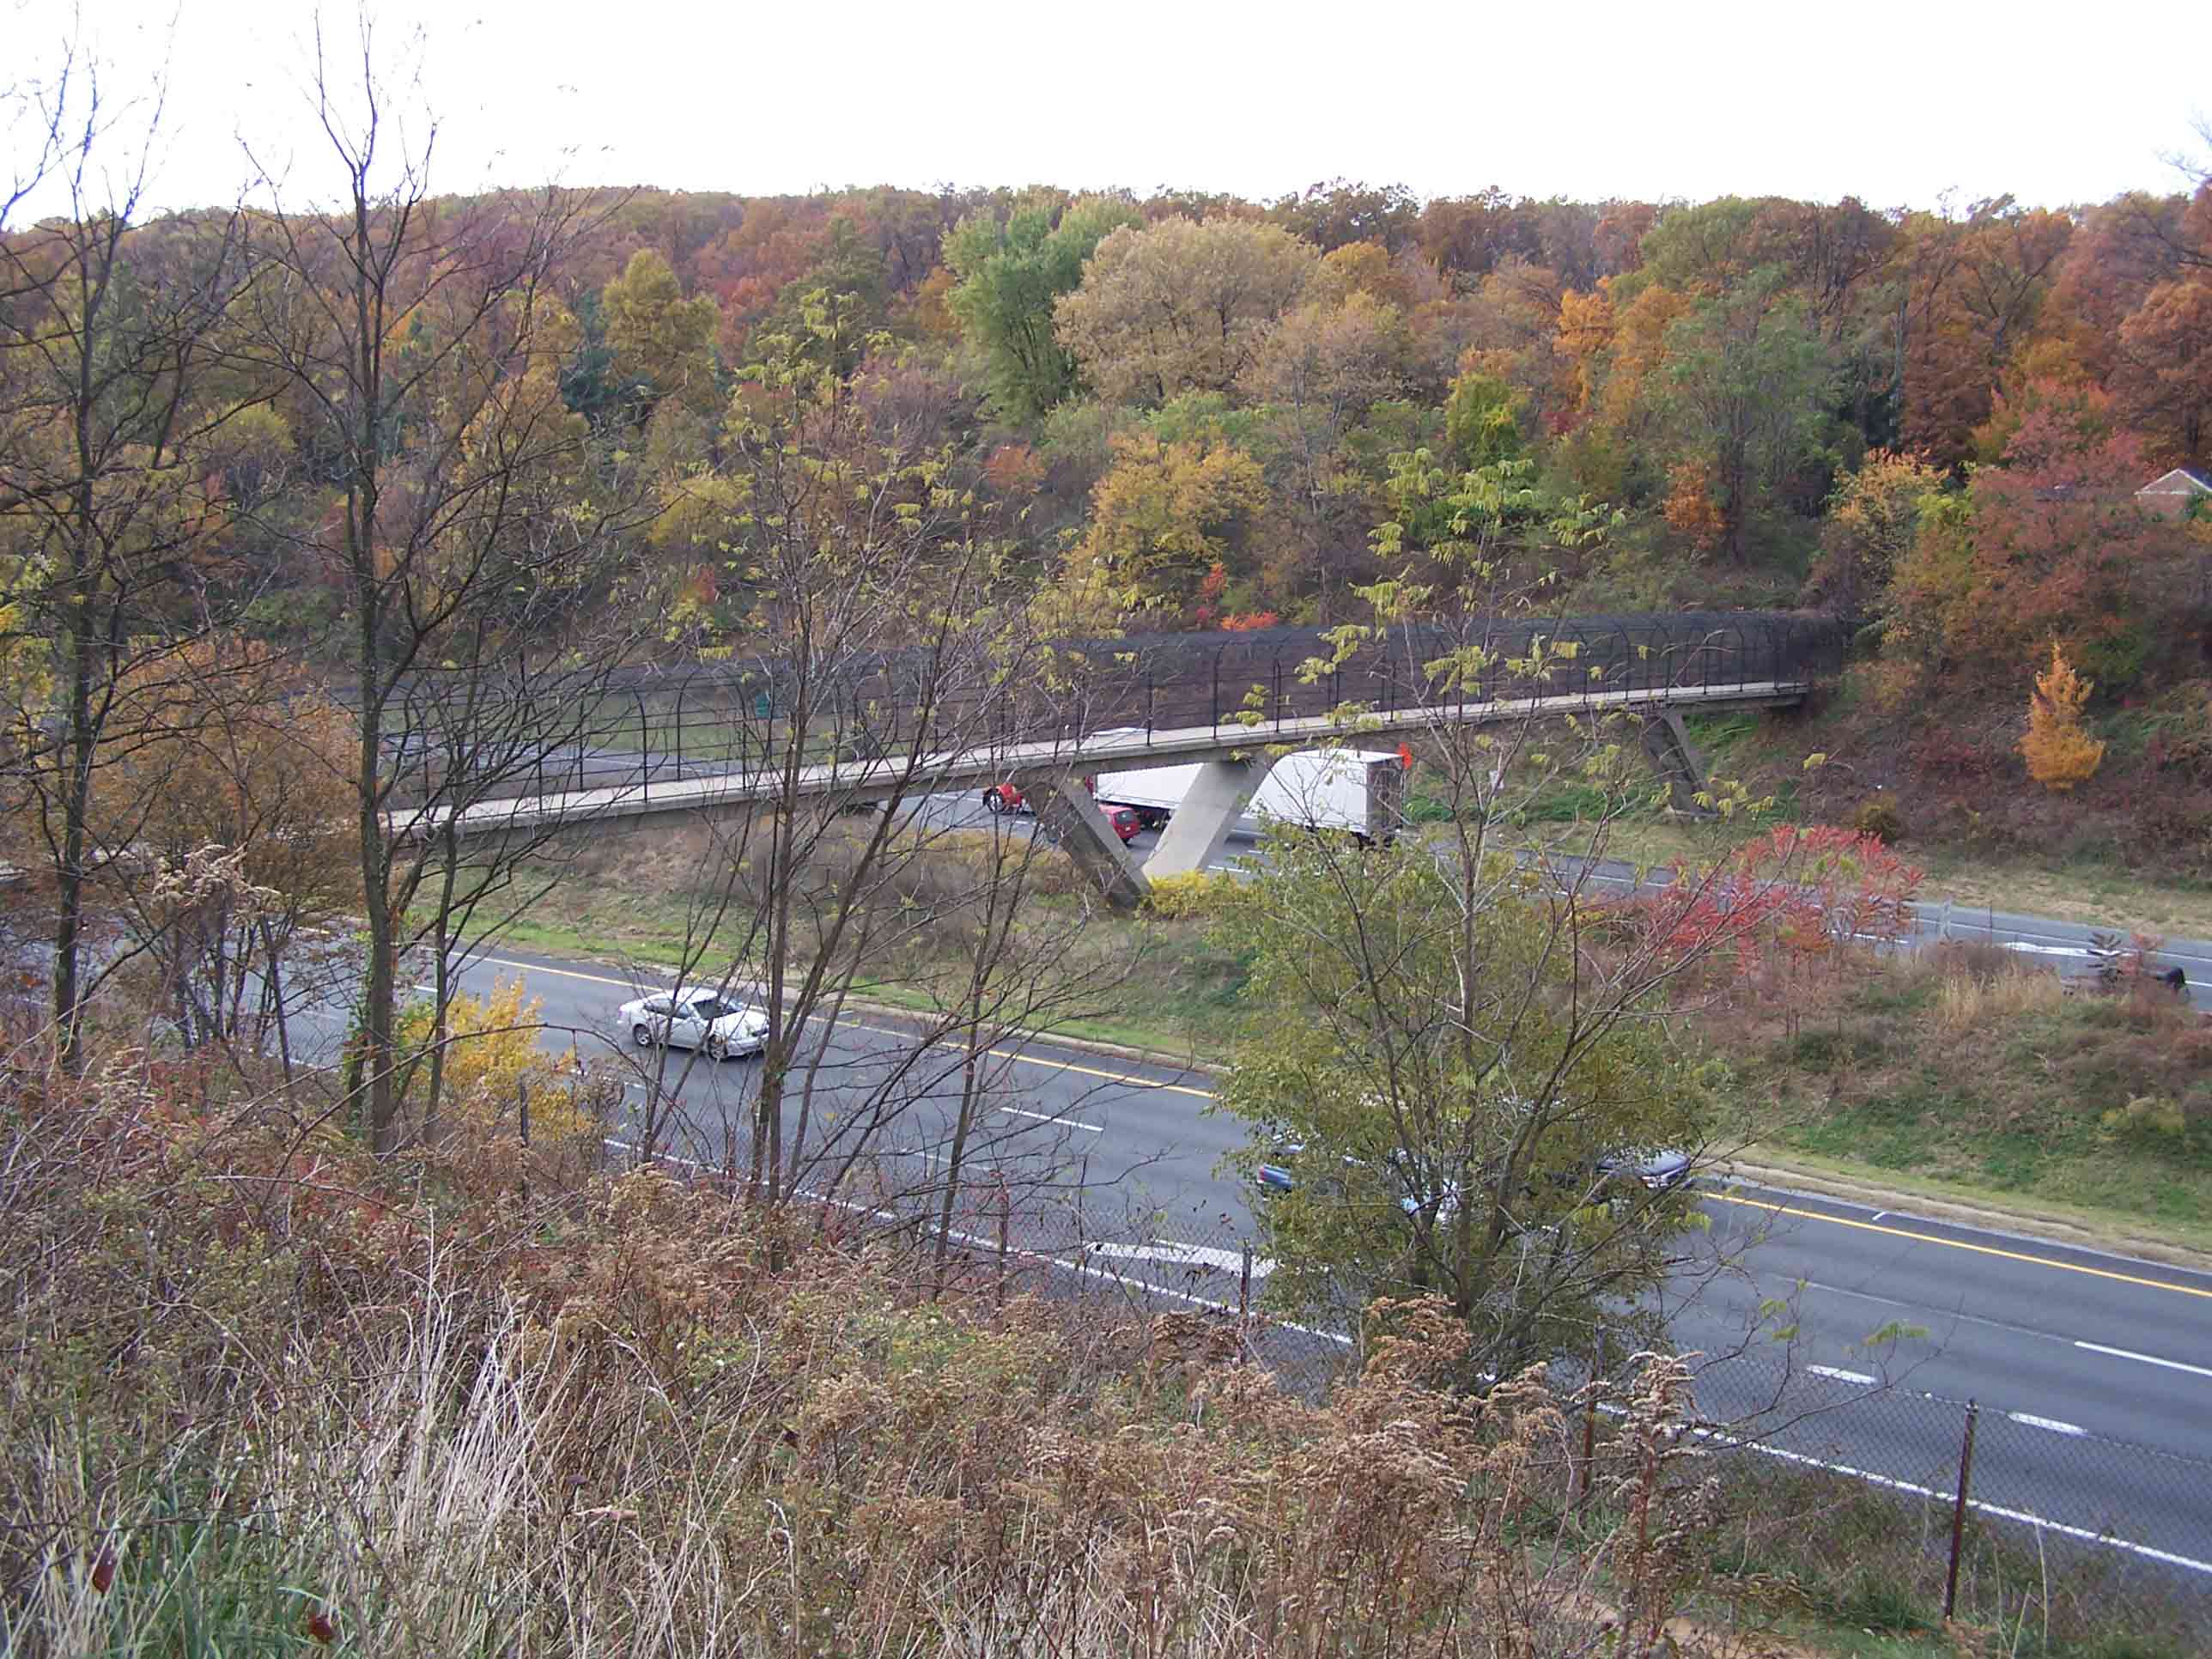 mm 8.6 - View of AT bridge over I-70 on parking lot spur trail. Courtesy at@rohland.org